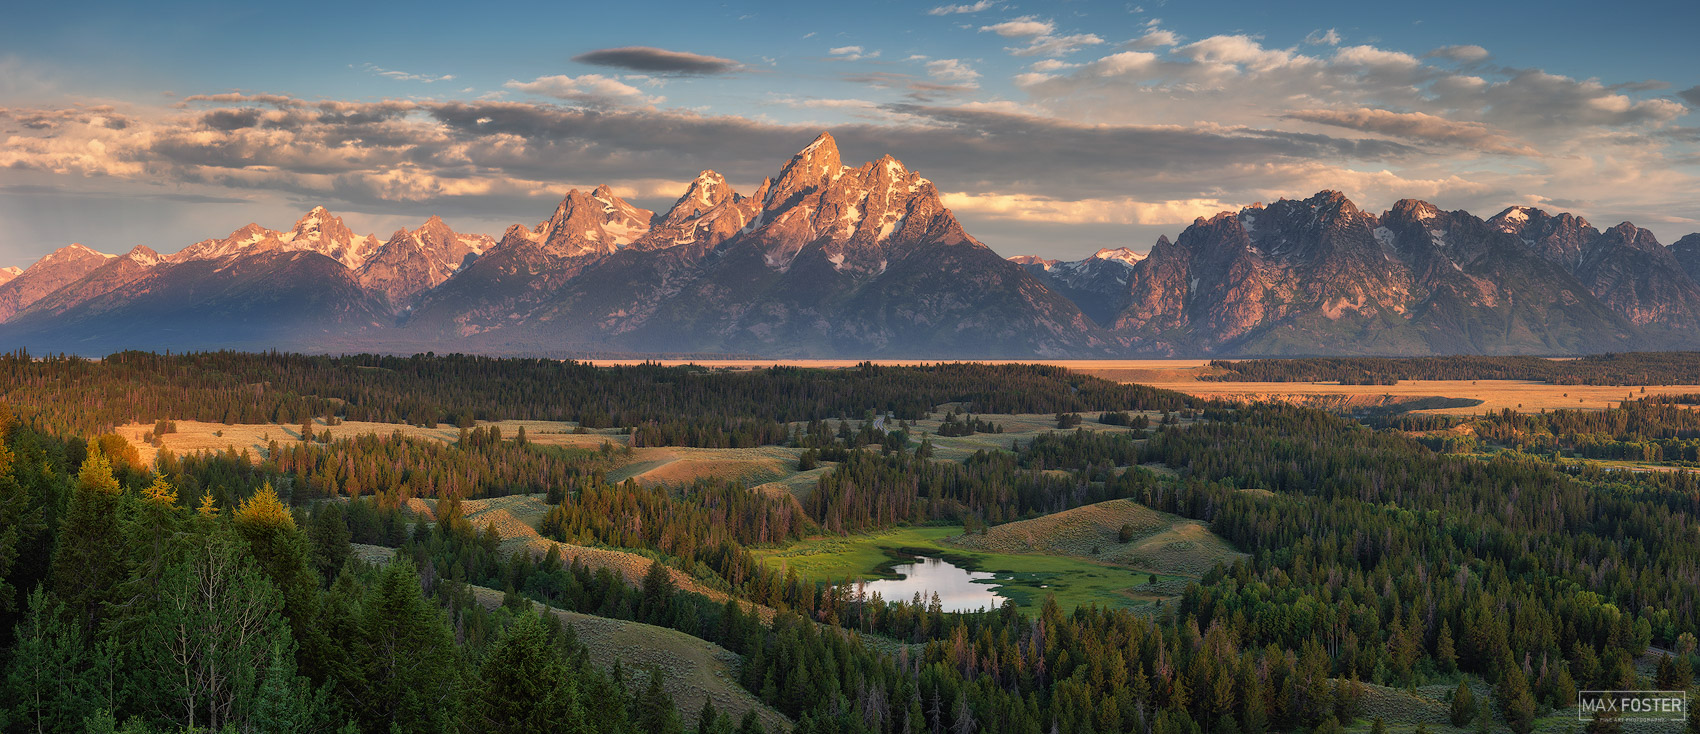 Bring nature into your home with A Grand Morning, Max Foster's limited edition panoramic photography print of Grand Teton National...